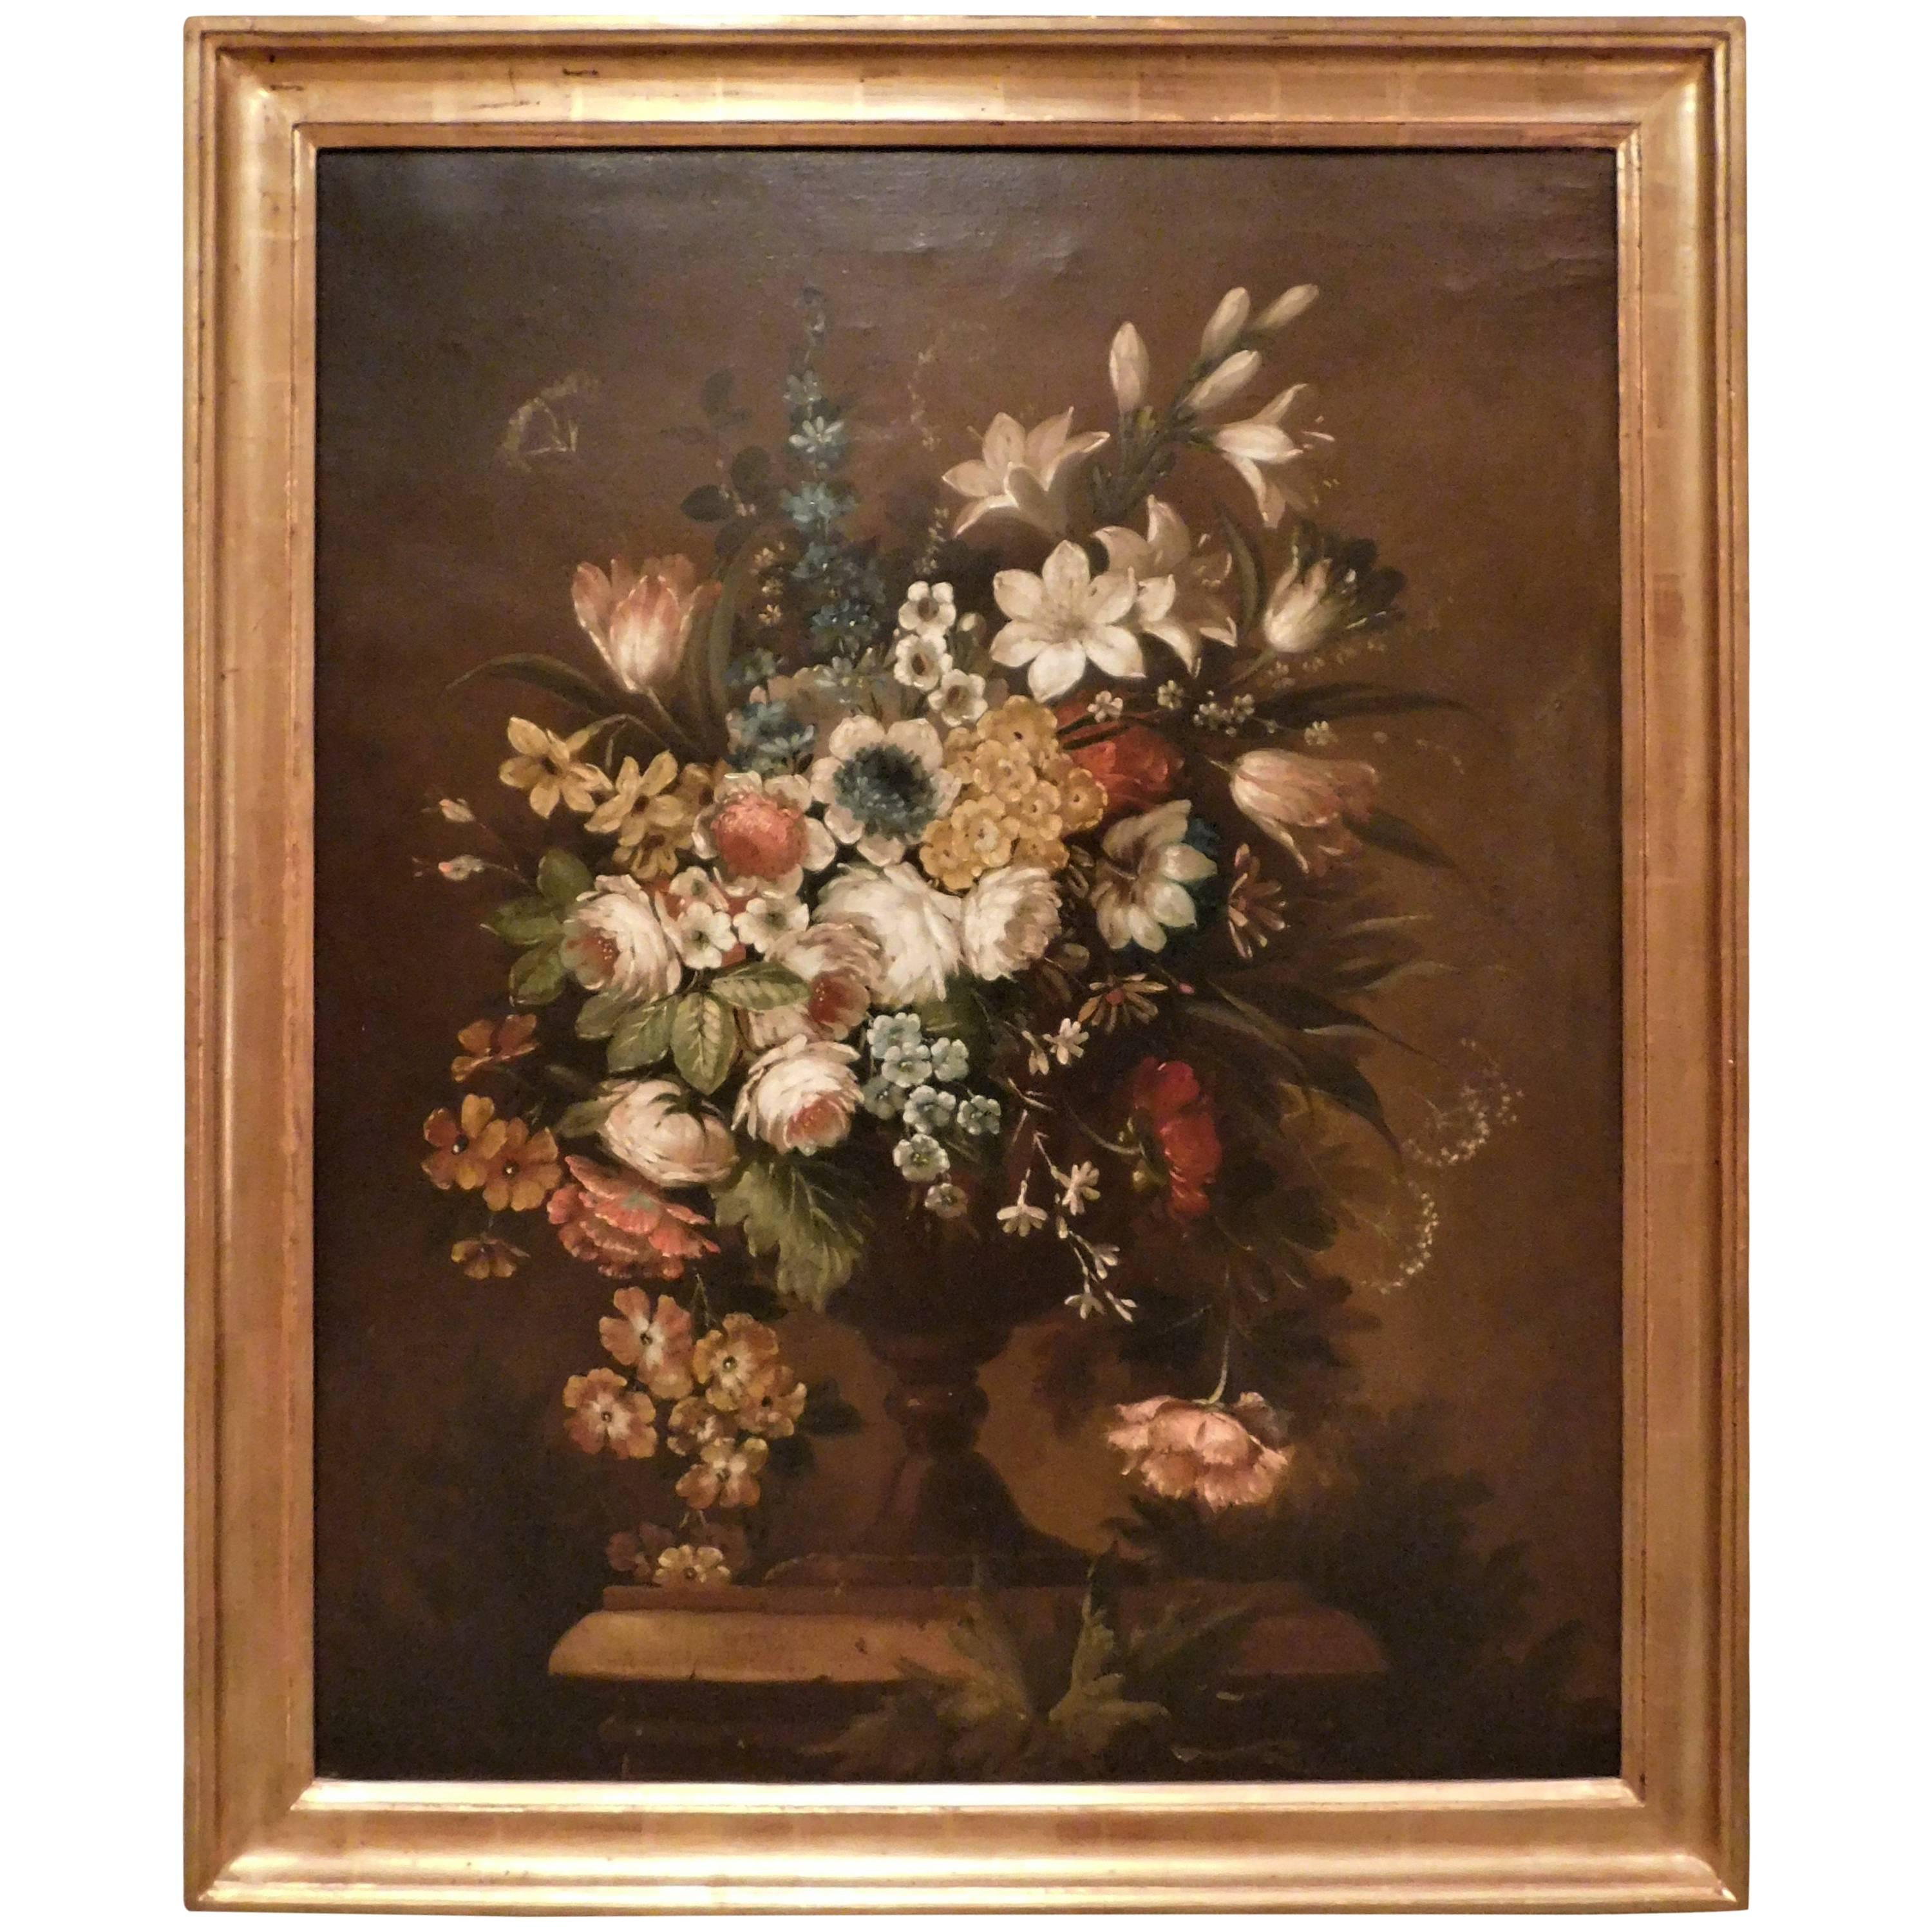 Oil on Canvas, "Flowers in an Urn"